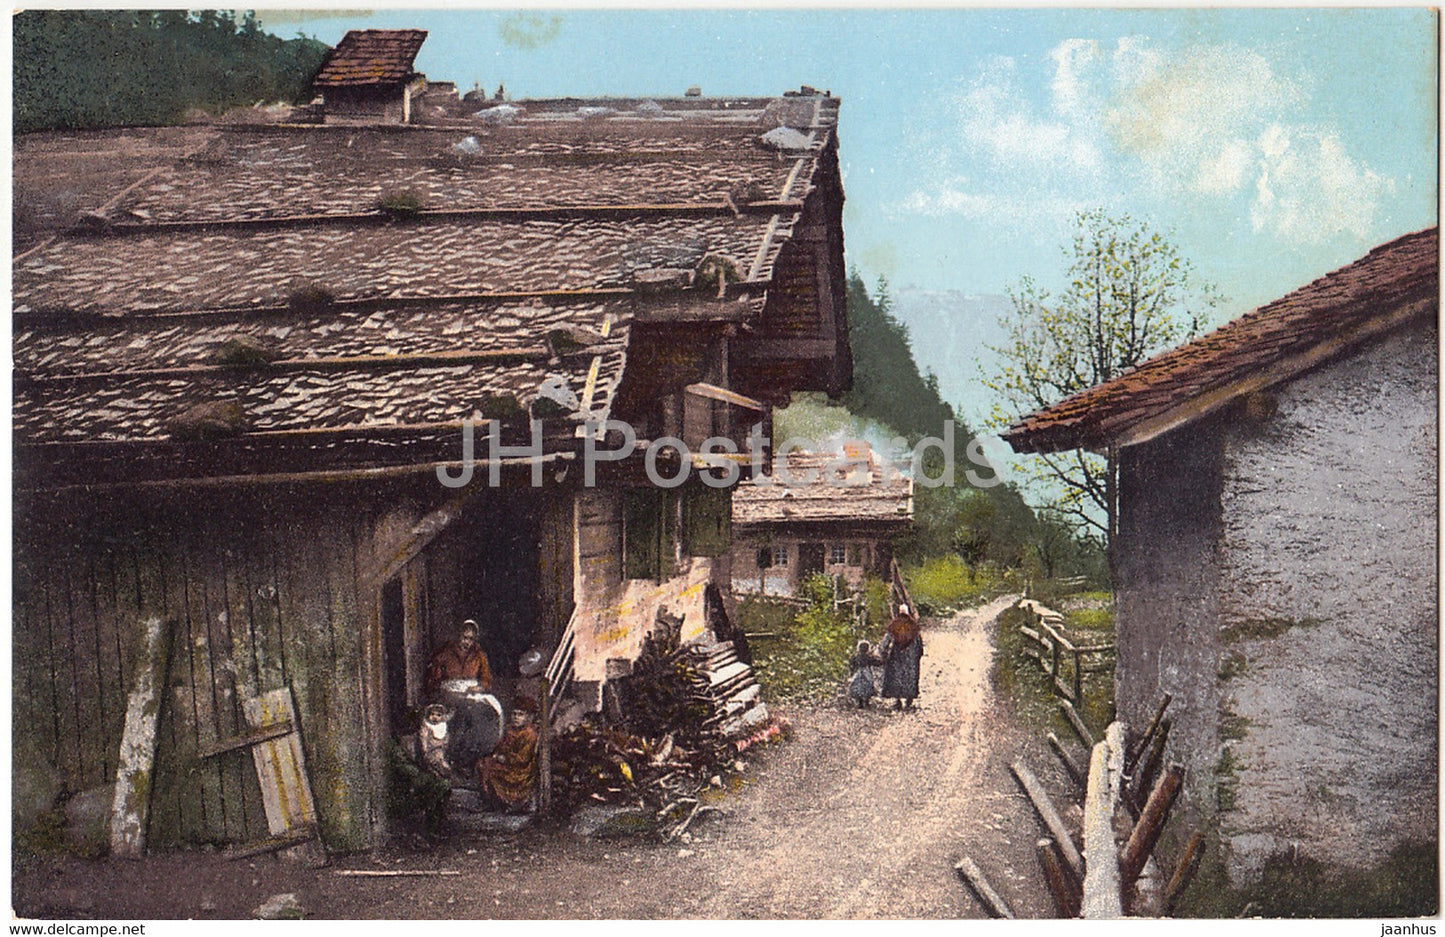 village houses - E. Rossier 8082 - old postcard -  1920 - Switzerland - used - JH Postcards